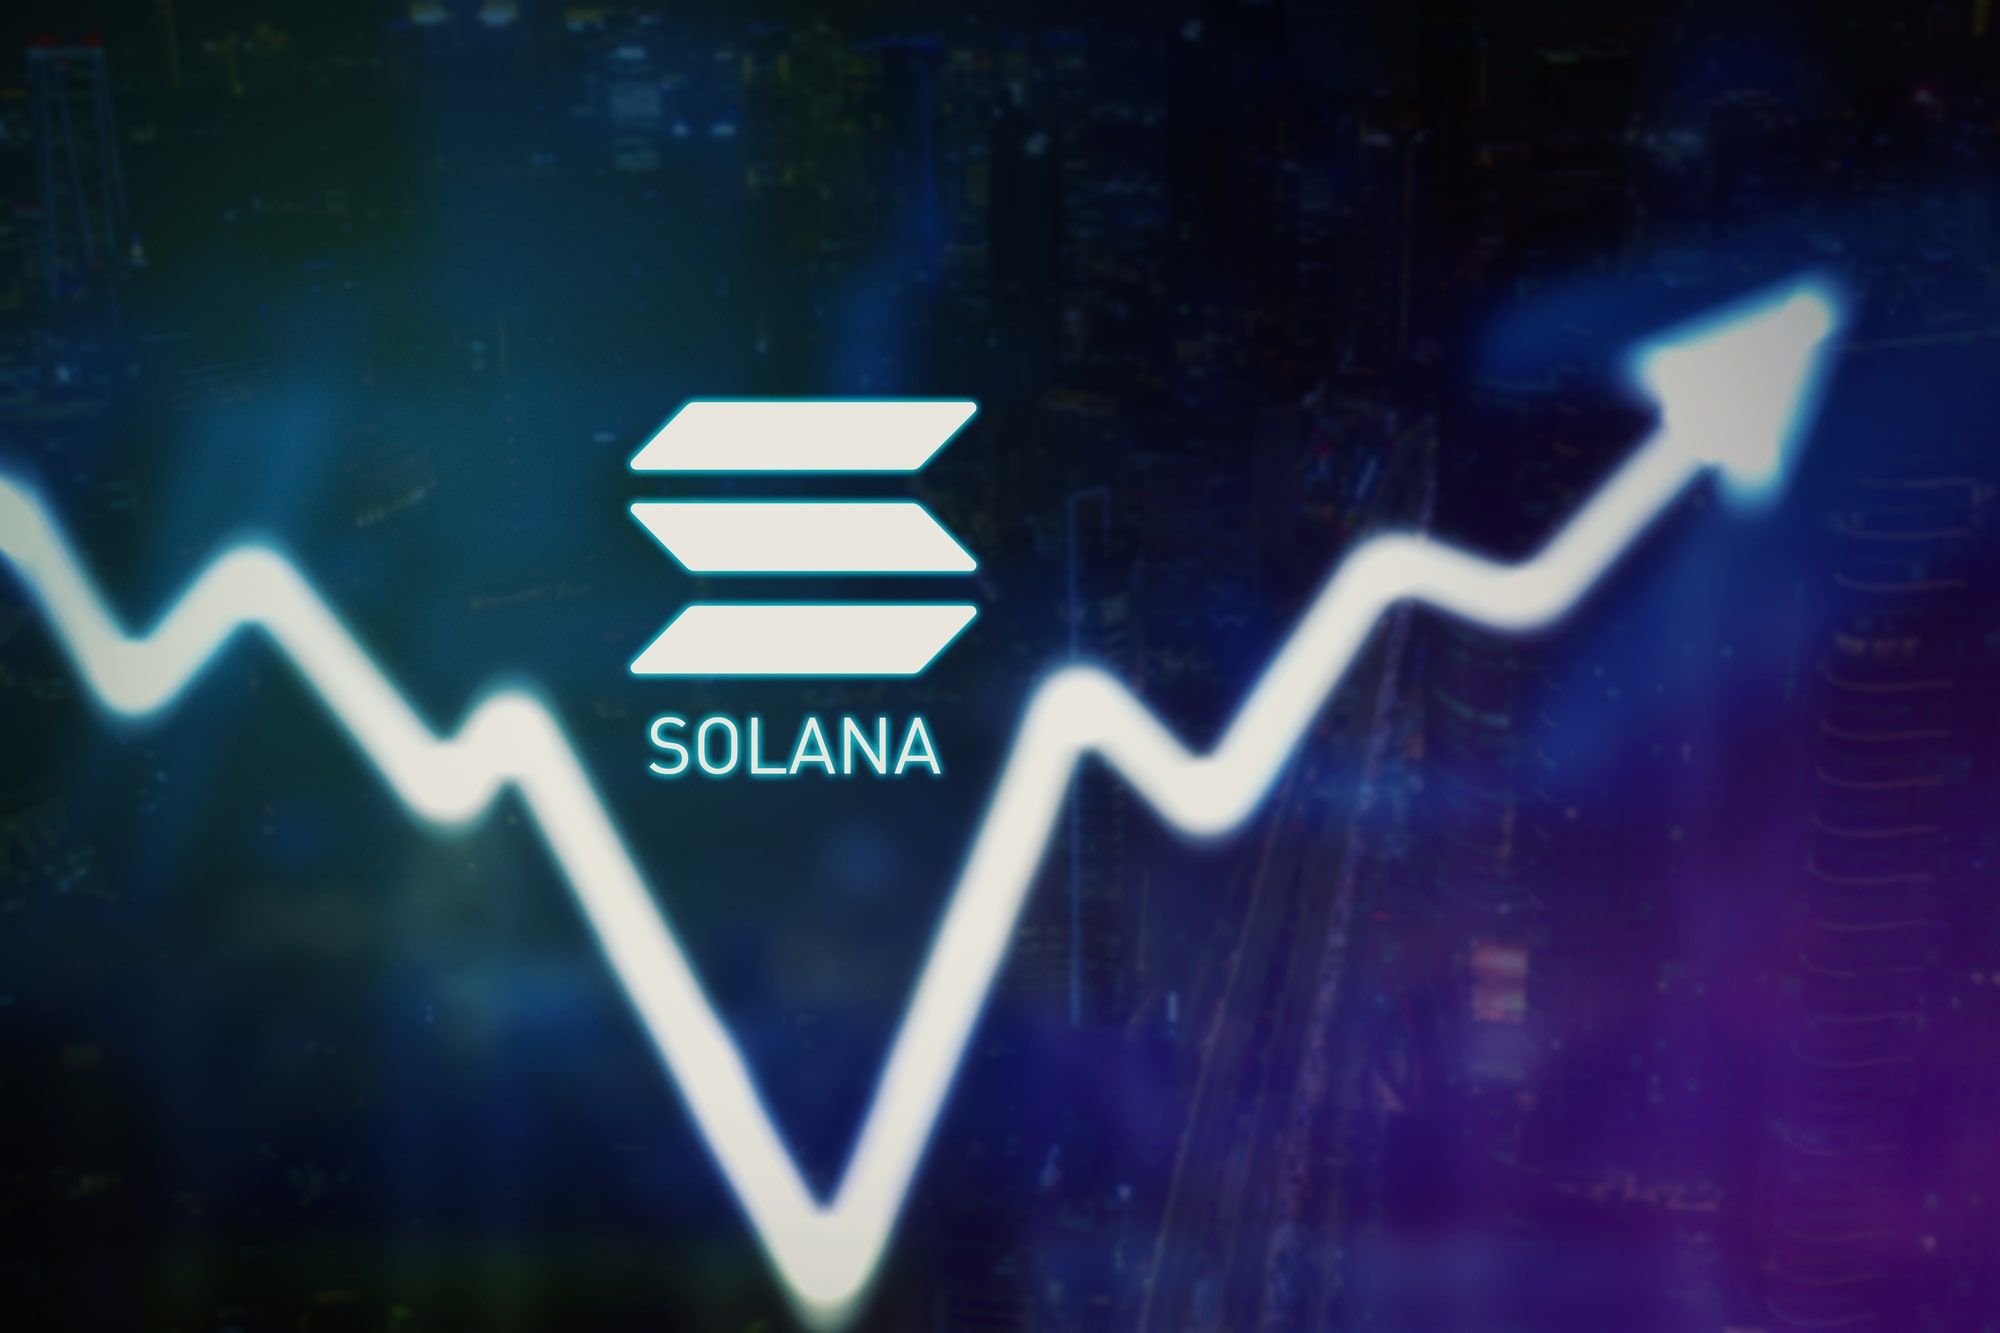 Solana enters in Top 10 cryptocurrencies, competing with Bitcoin and Ethereum